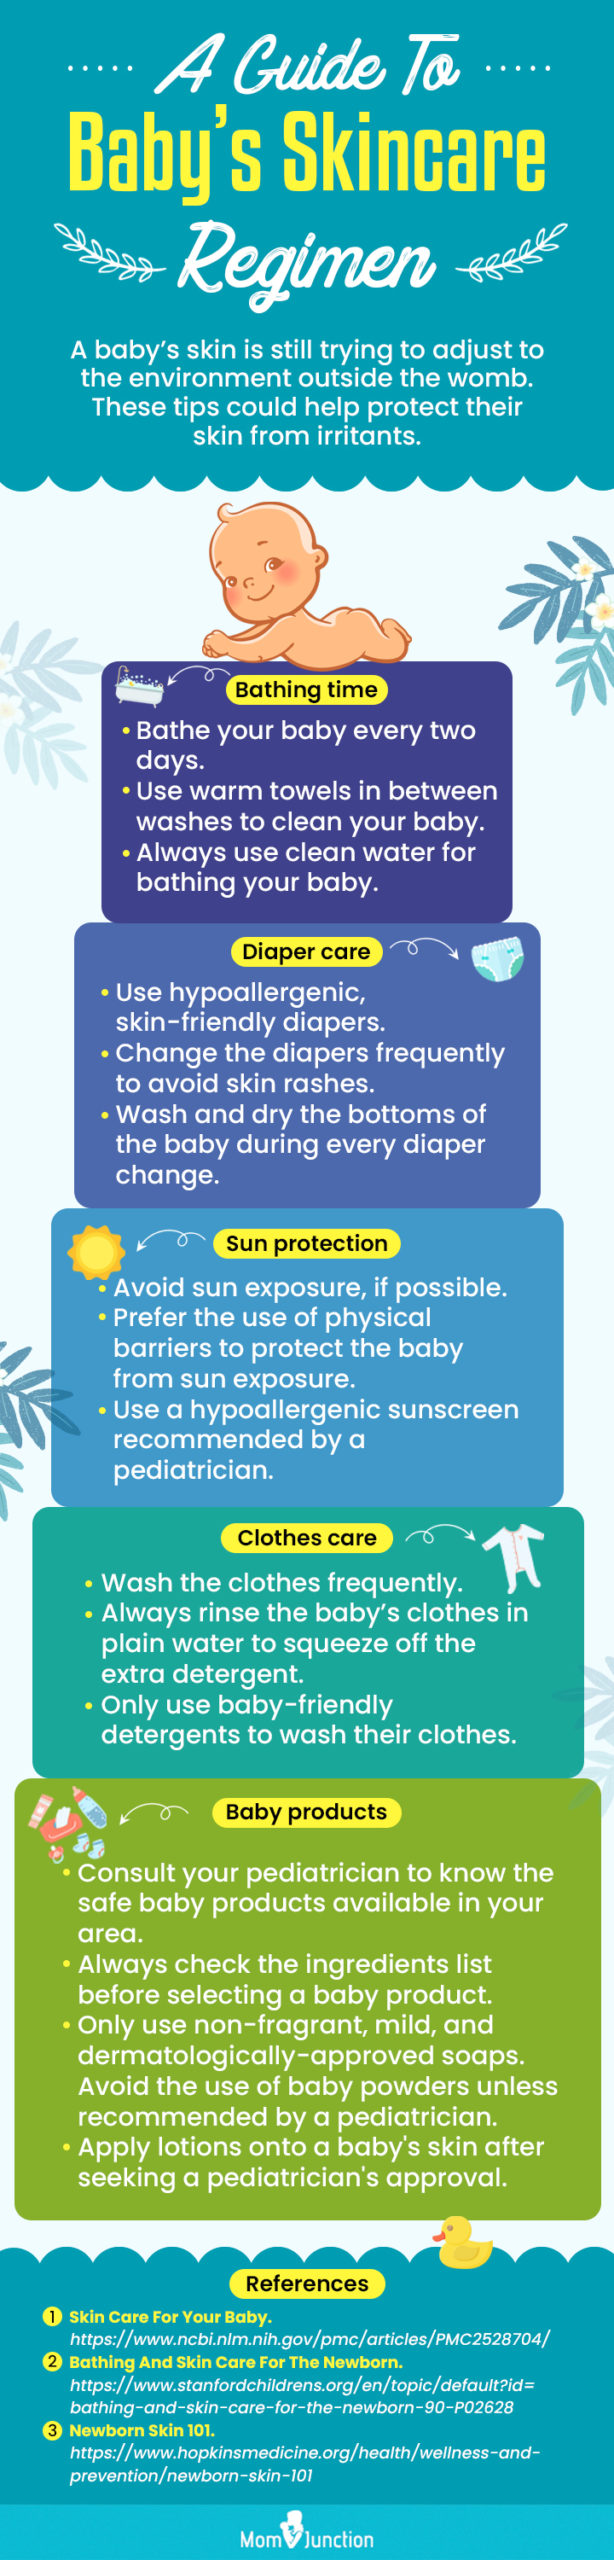 a guide to baby's skincare regimen (infographic)